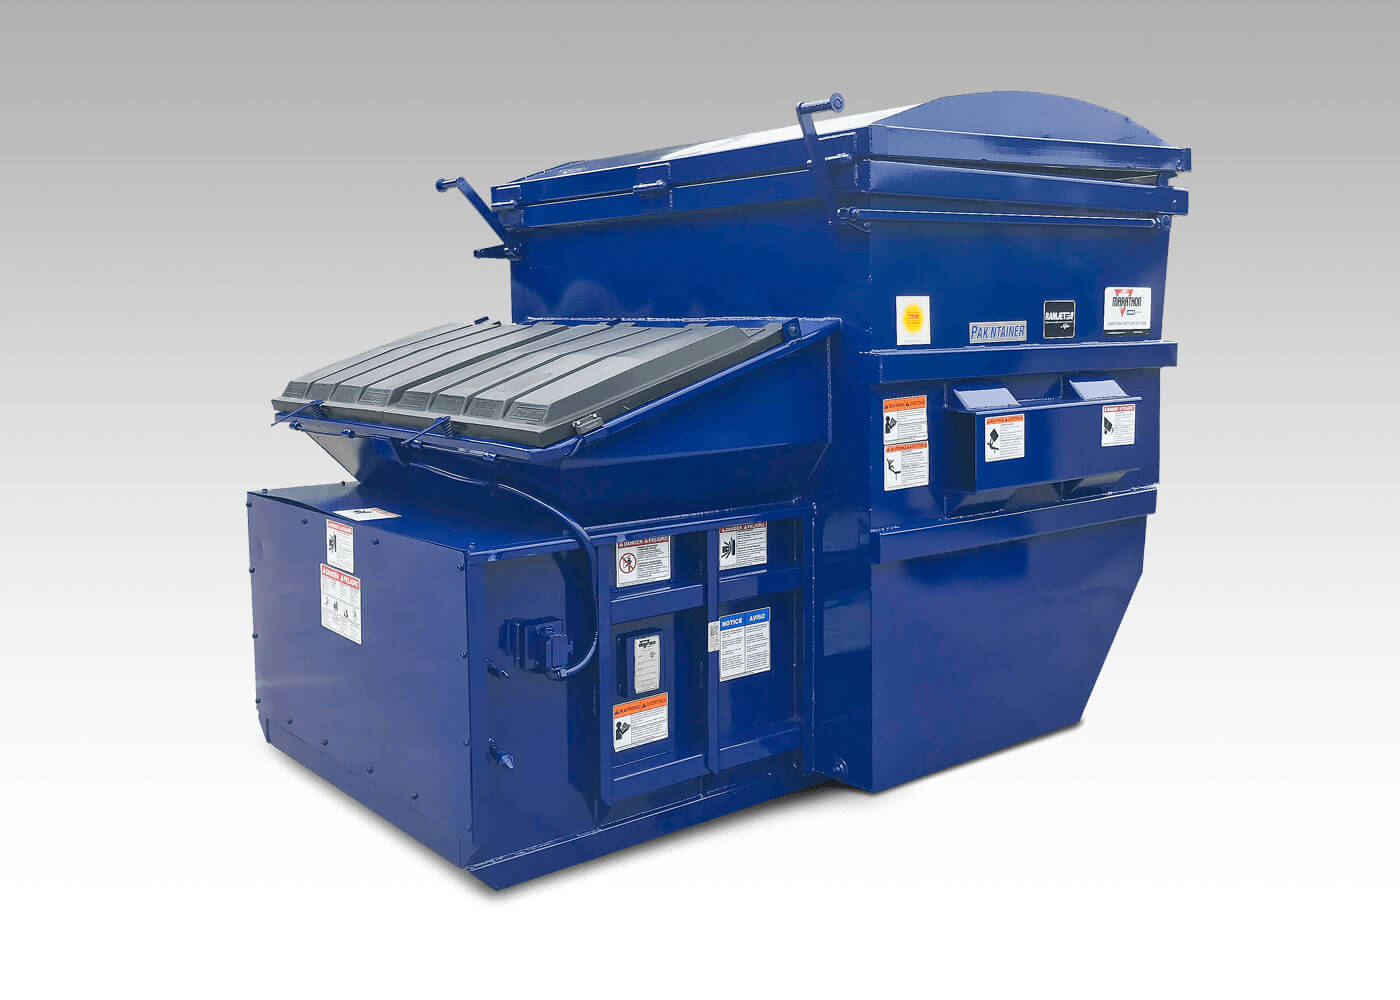 Self contained trash compactor for use with front load or rear load garbage trucks